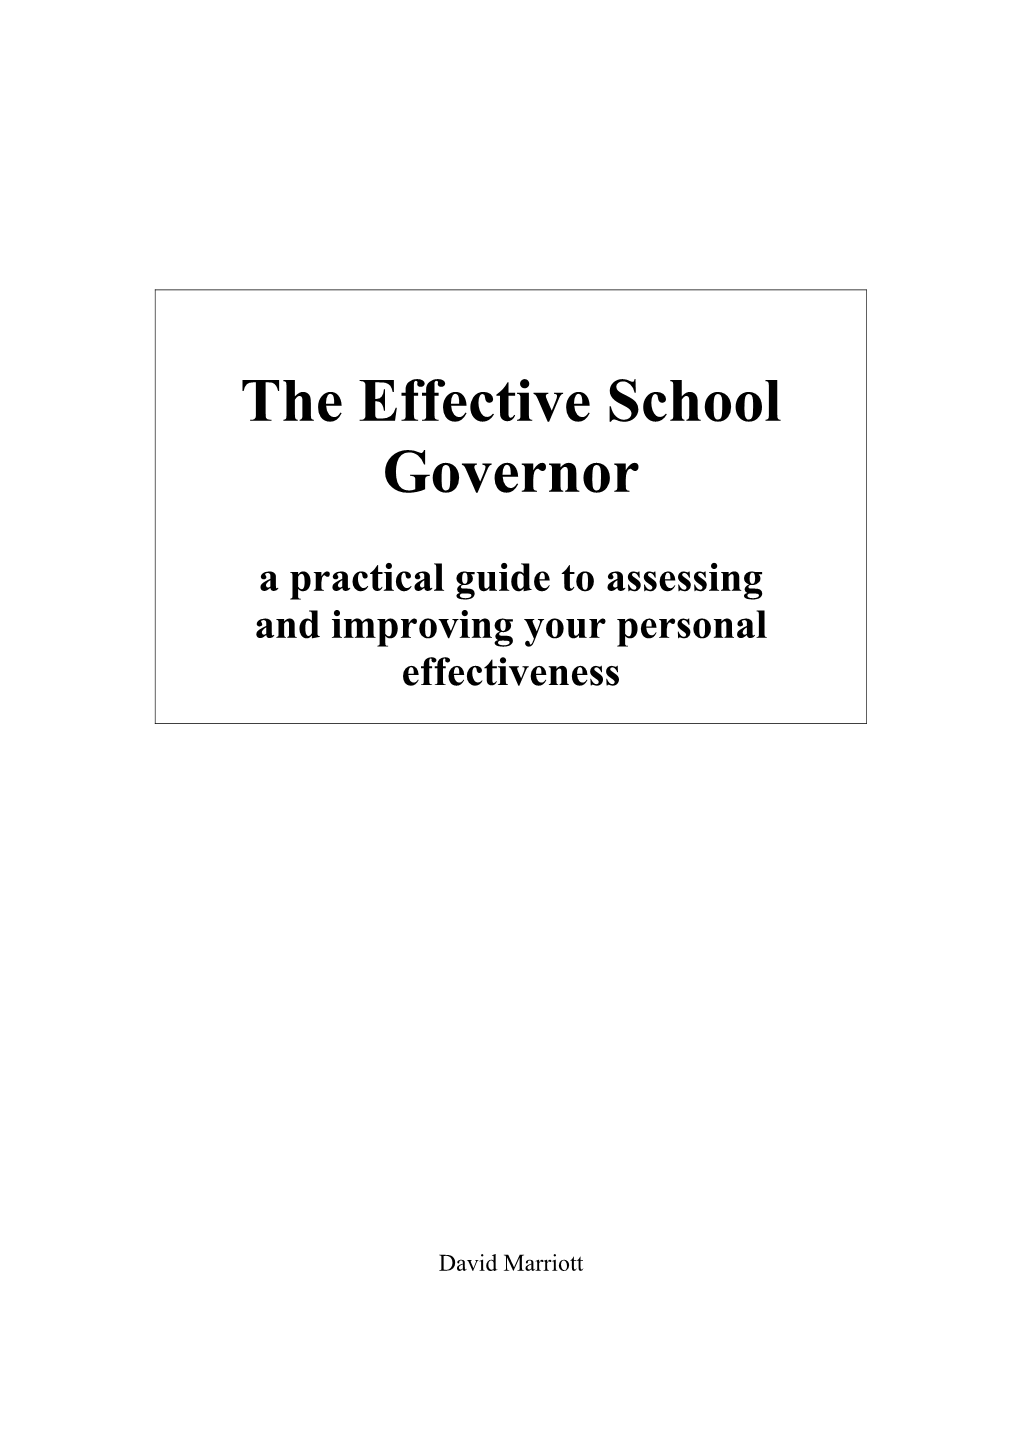 The Effective Governor: A Practical Guide To Assessing And Improving Your Effectiveness